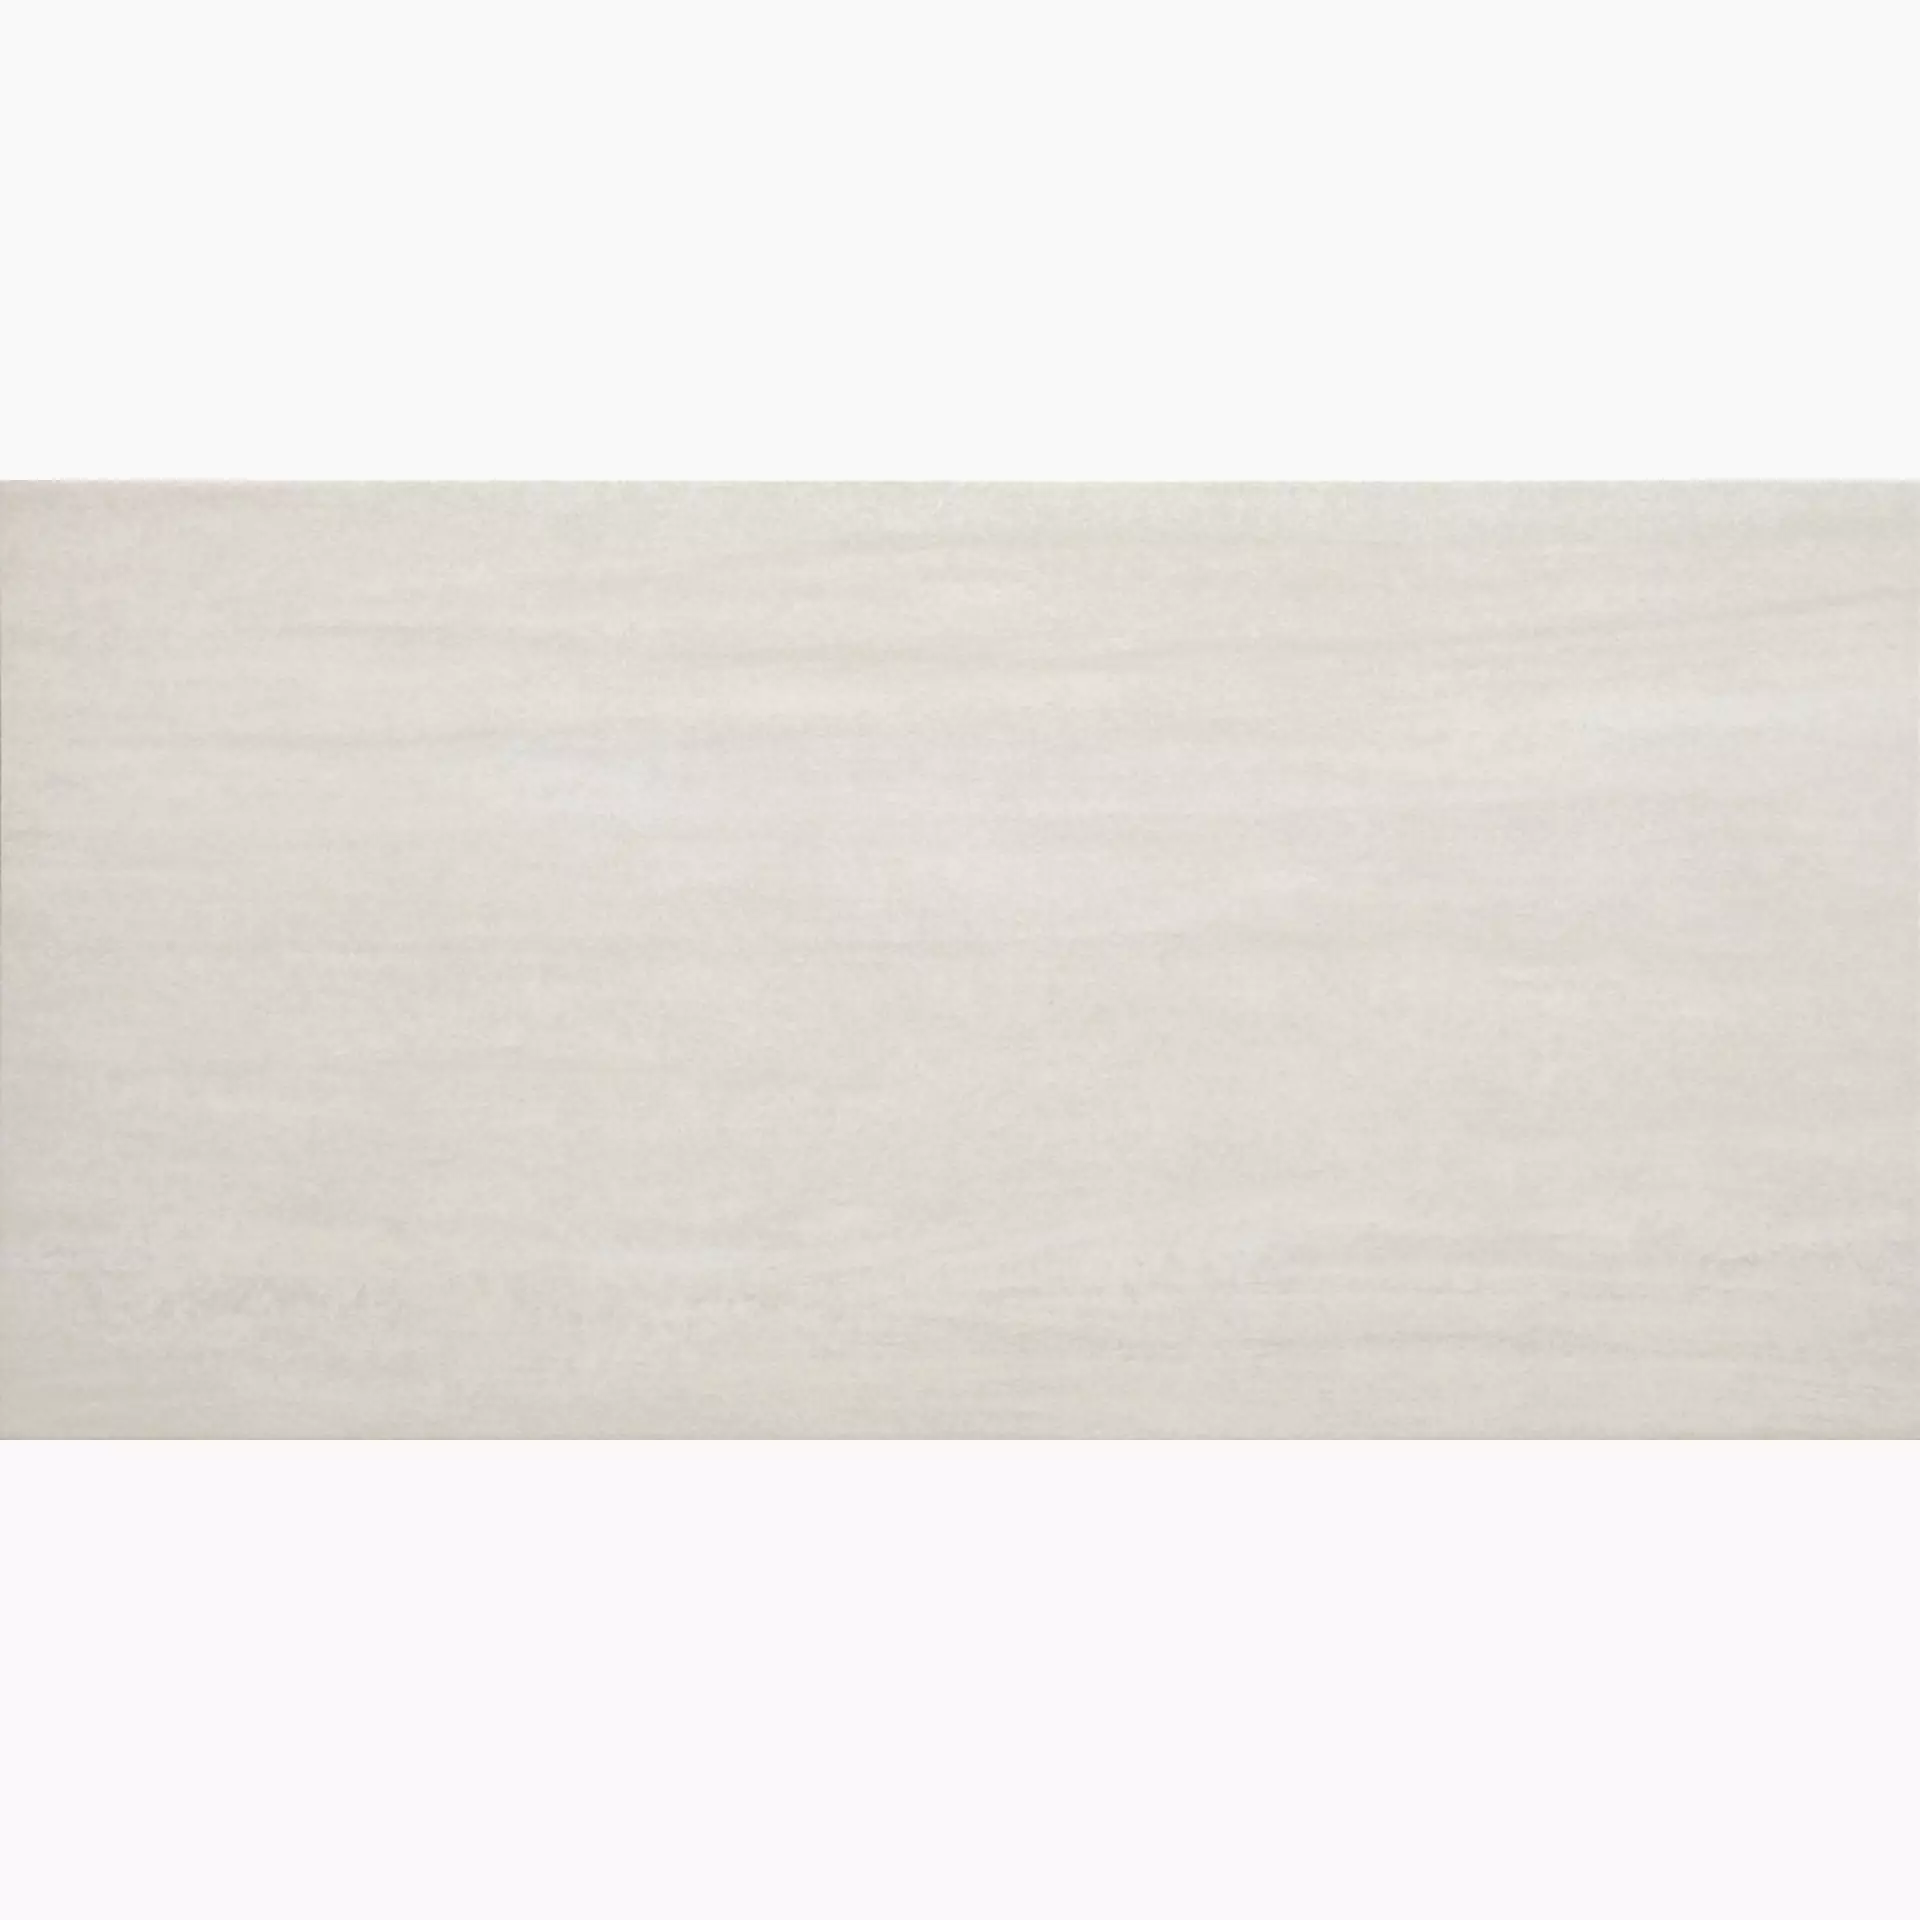 Rondine Contract White Lappato J84571 30x60cm rectified 9,5mm